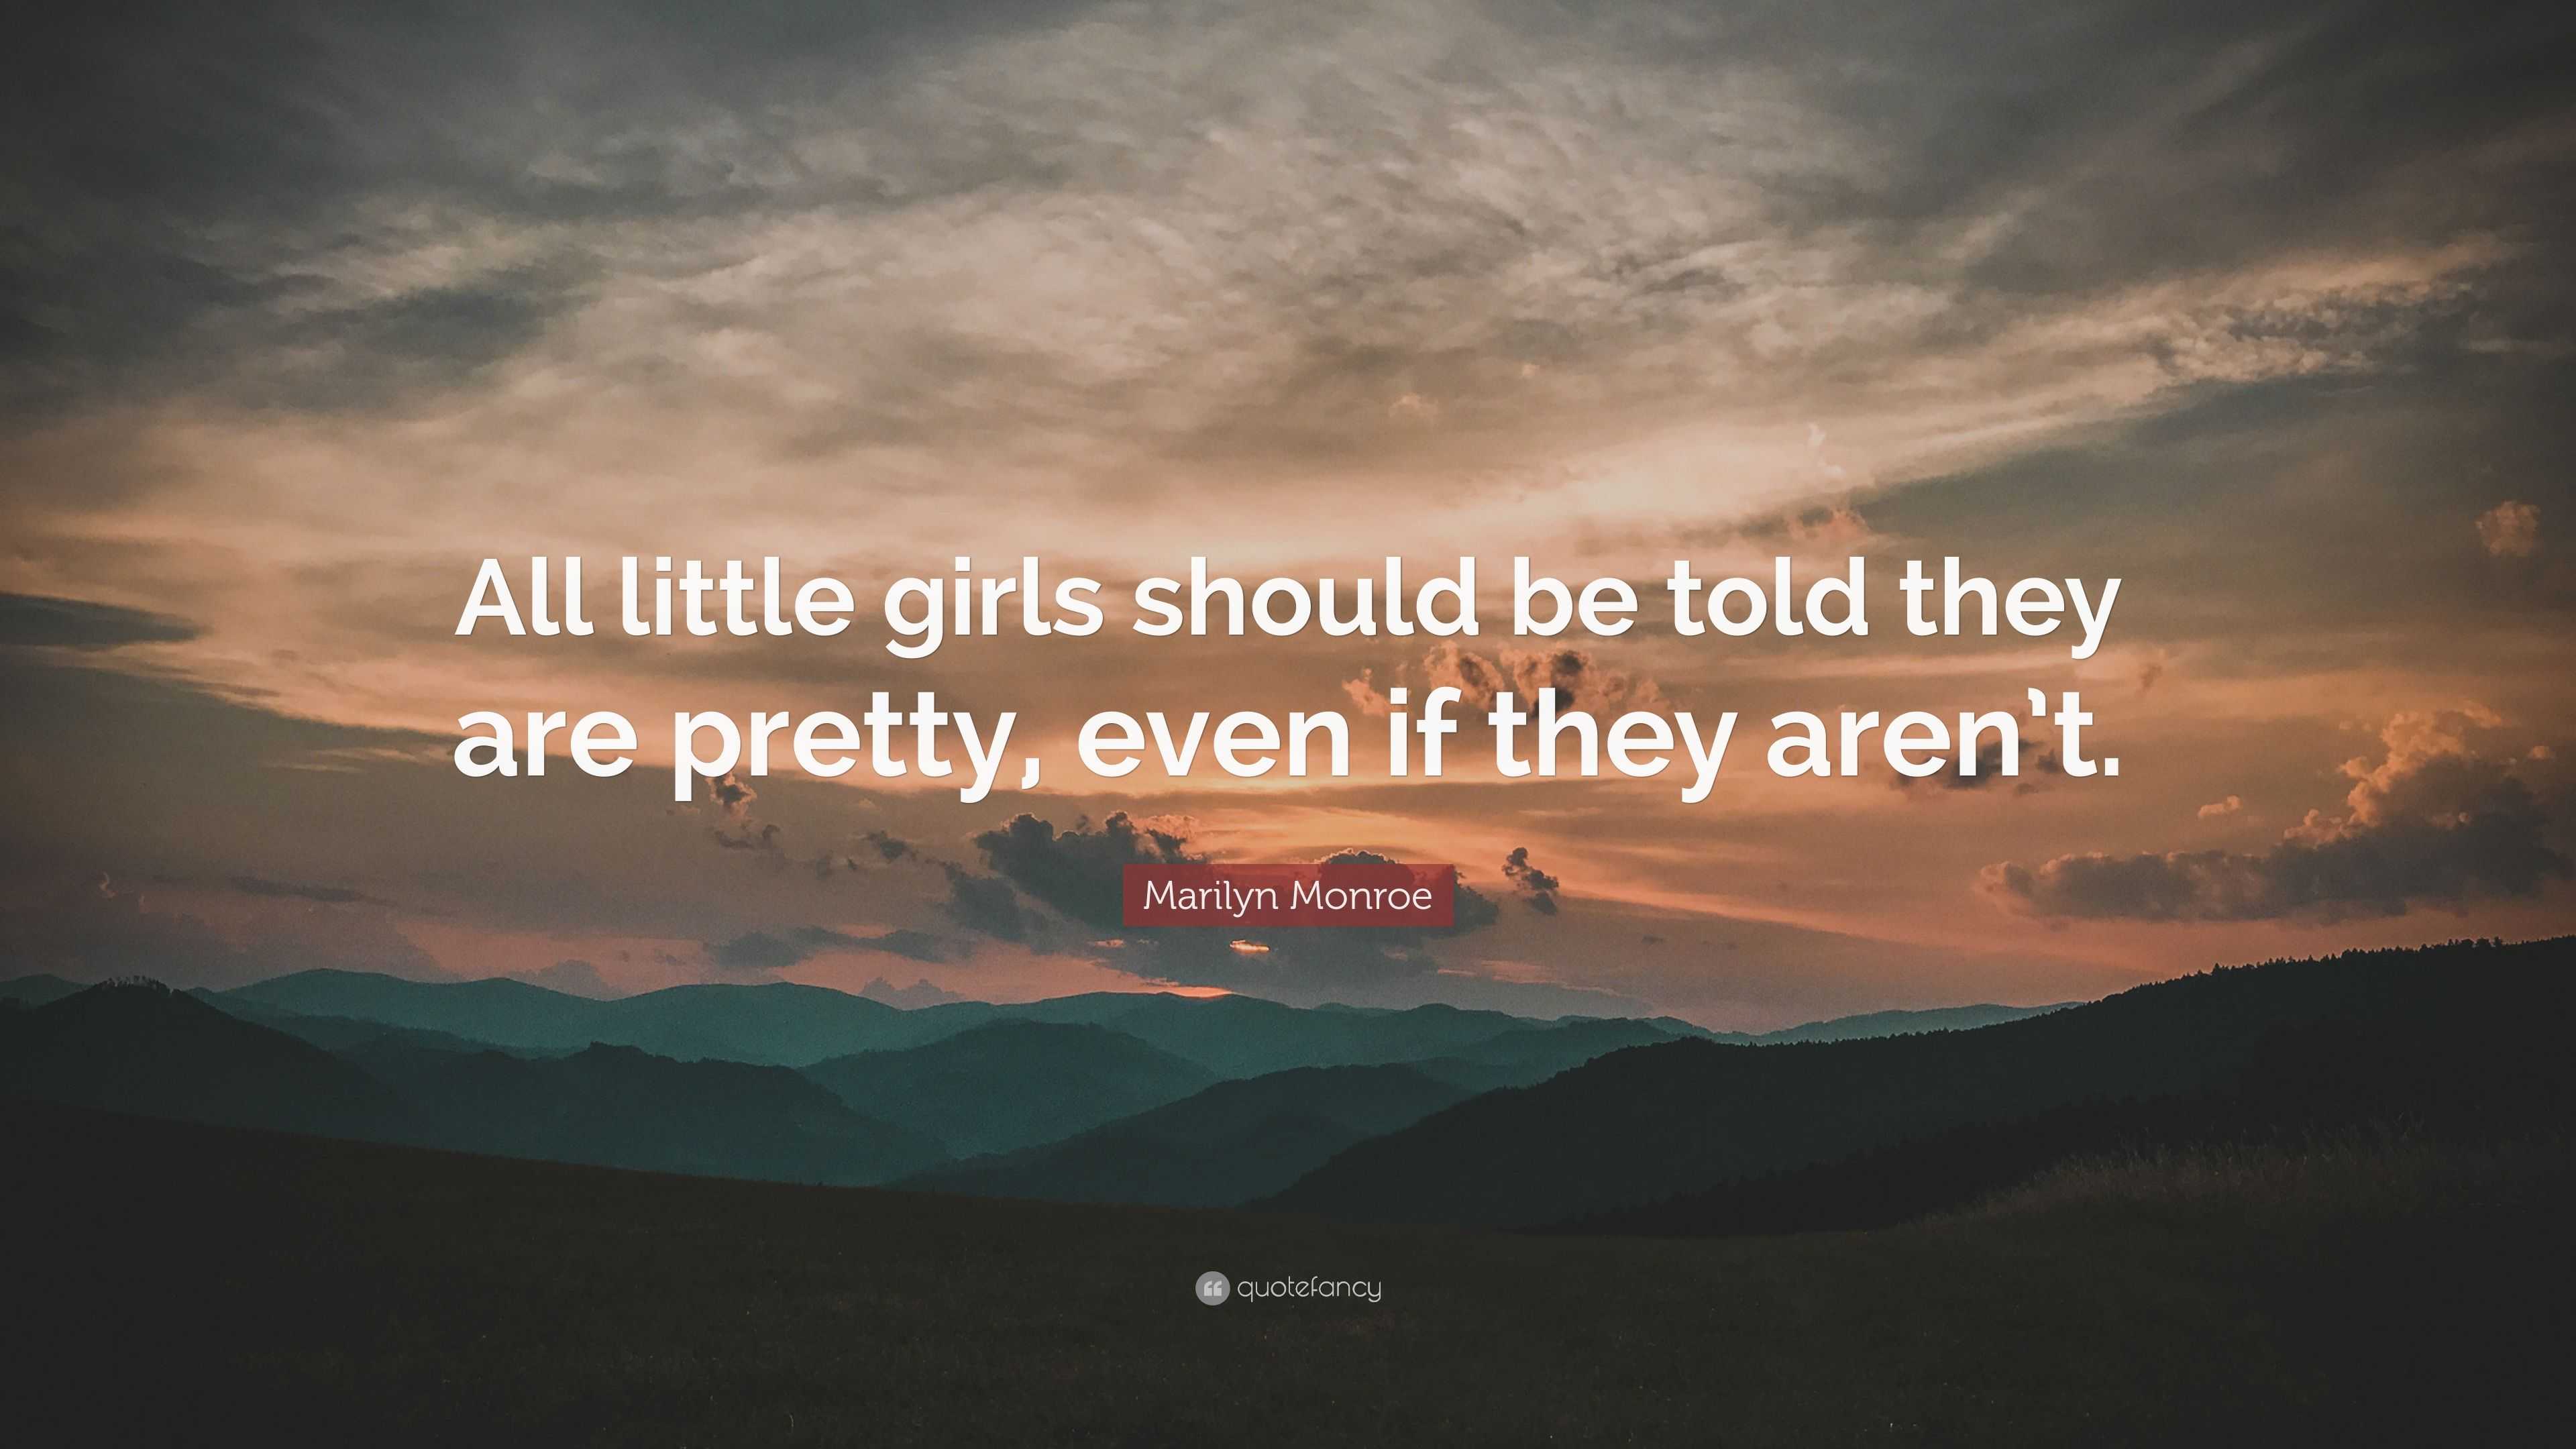 Marilyn Monroe Quote: “All little girls should be told they are pretty ...